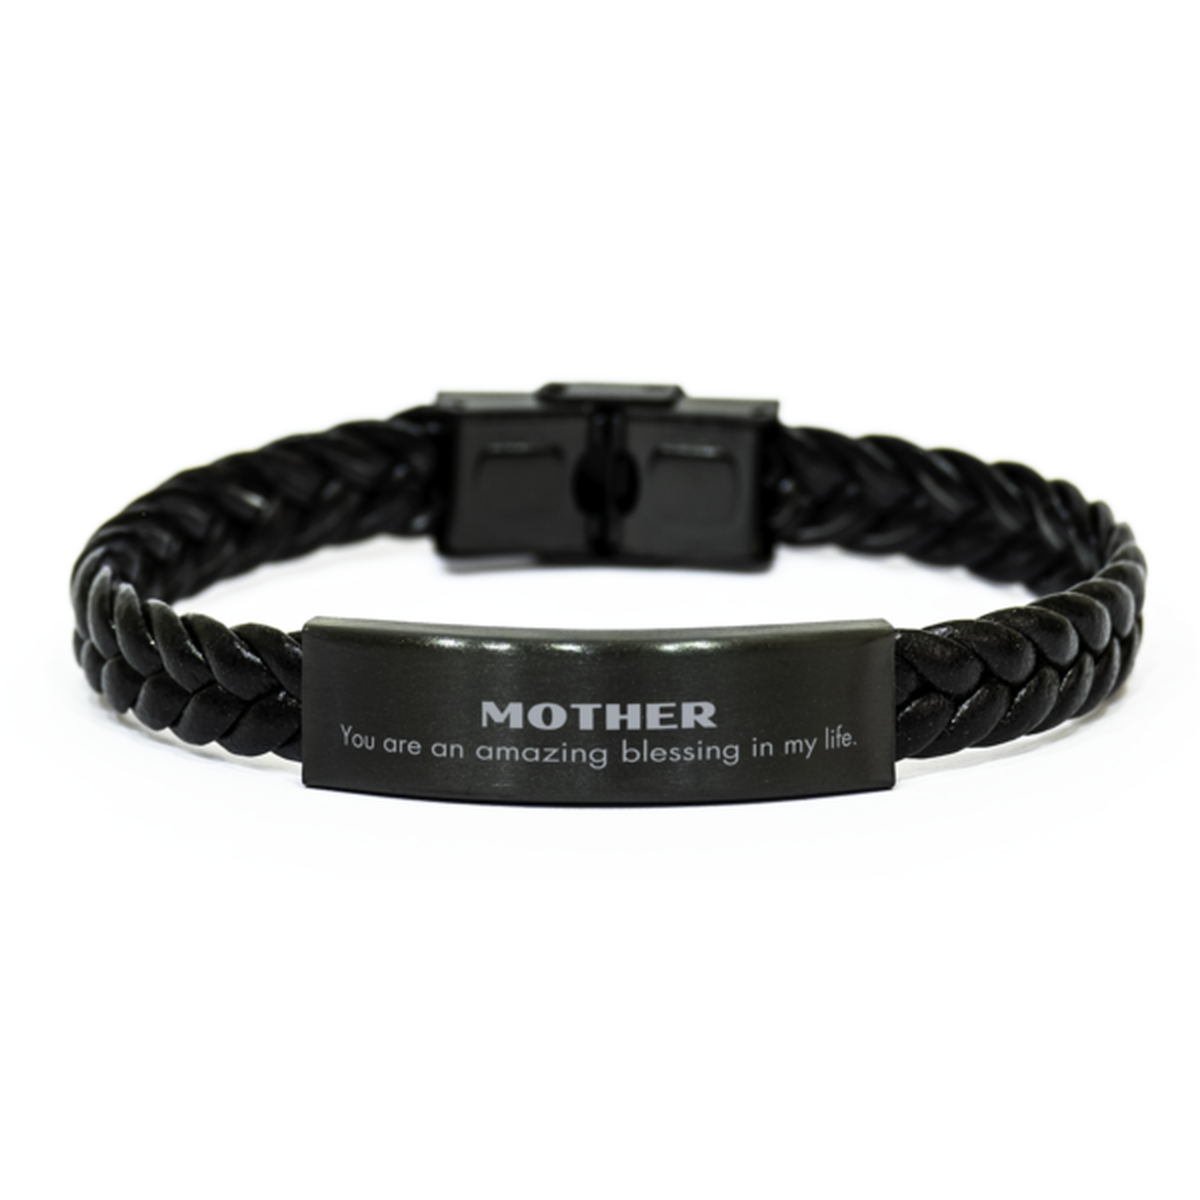 Mother Braided Leather Bracelet, You are an amazing blessing in my life, Thank You Gifts For Mother, Inspirational Birthday Christmas Unique Gifts For Mother